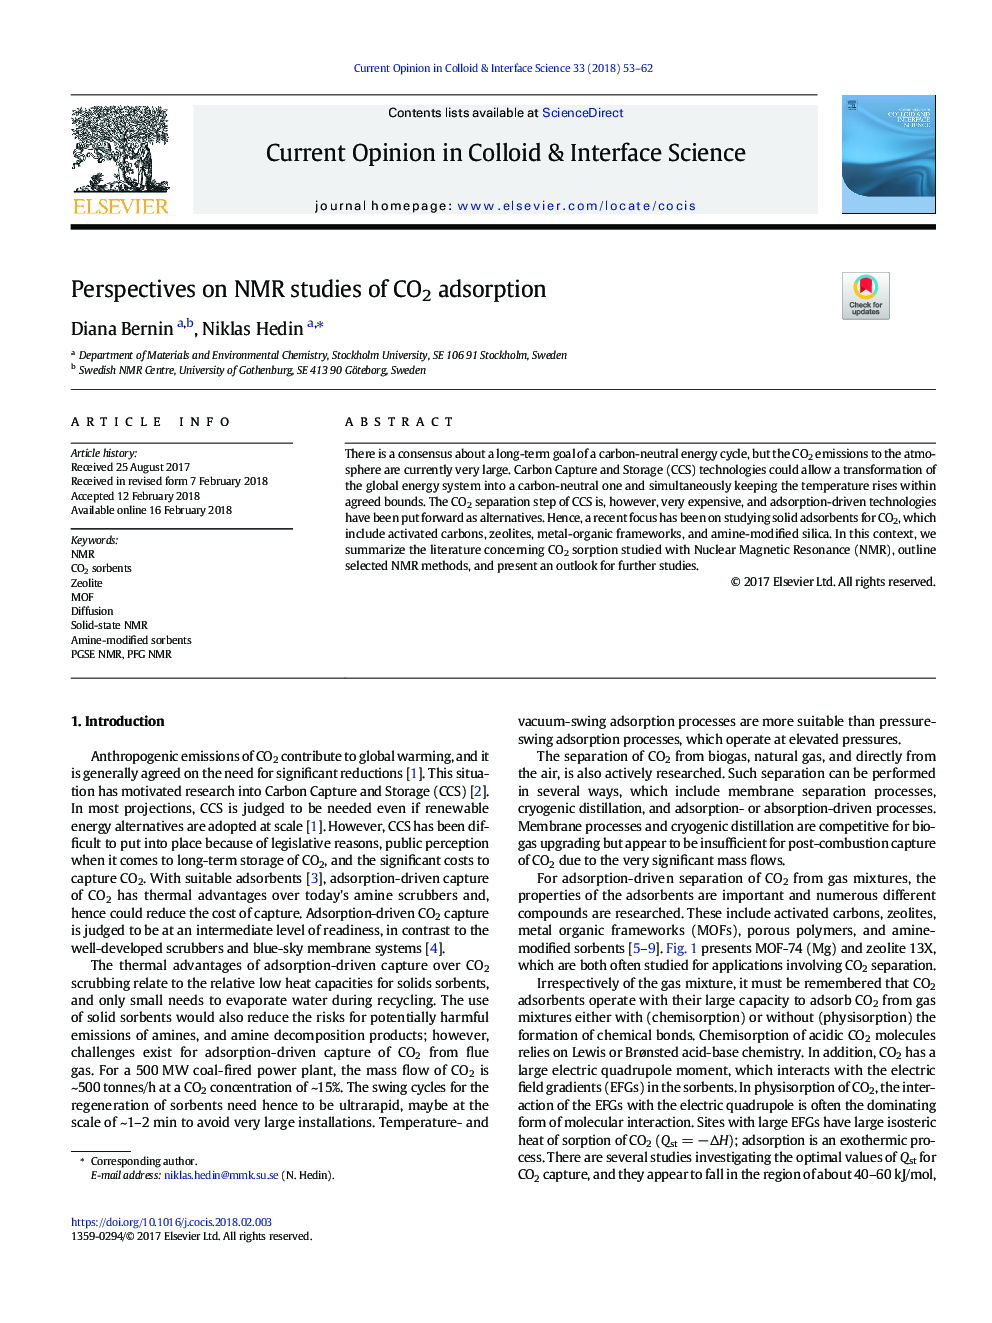 Perspectives on NMR studies of CO2 adsorption